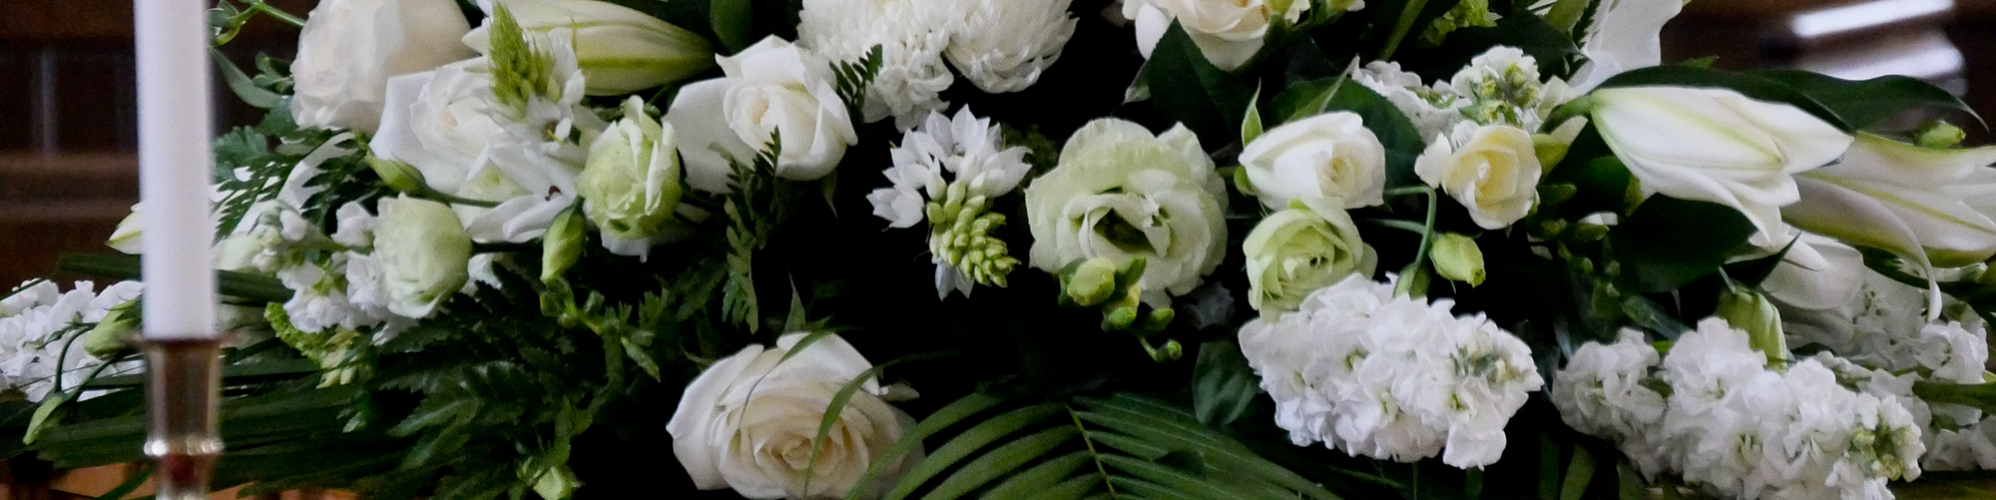 Funeral flowers for a deceased leaseholder. SAM Conveyancing explains What Happens When a Leaseholder Dies? 